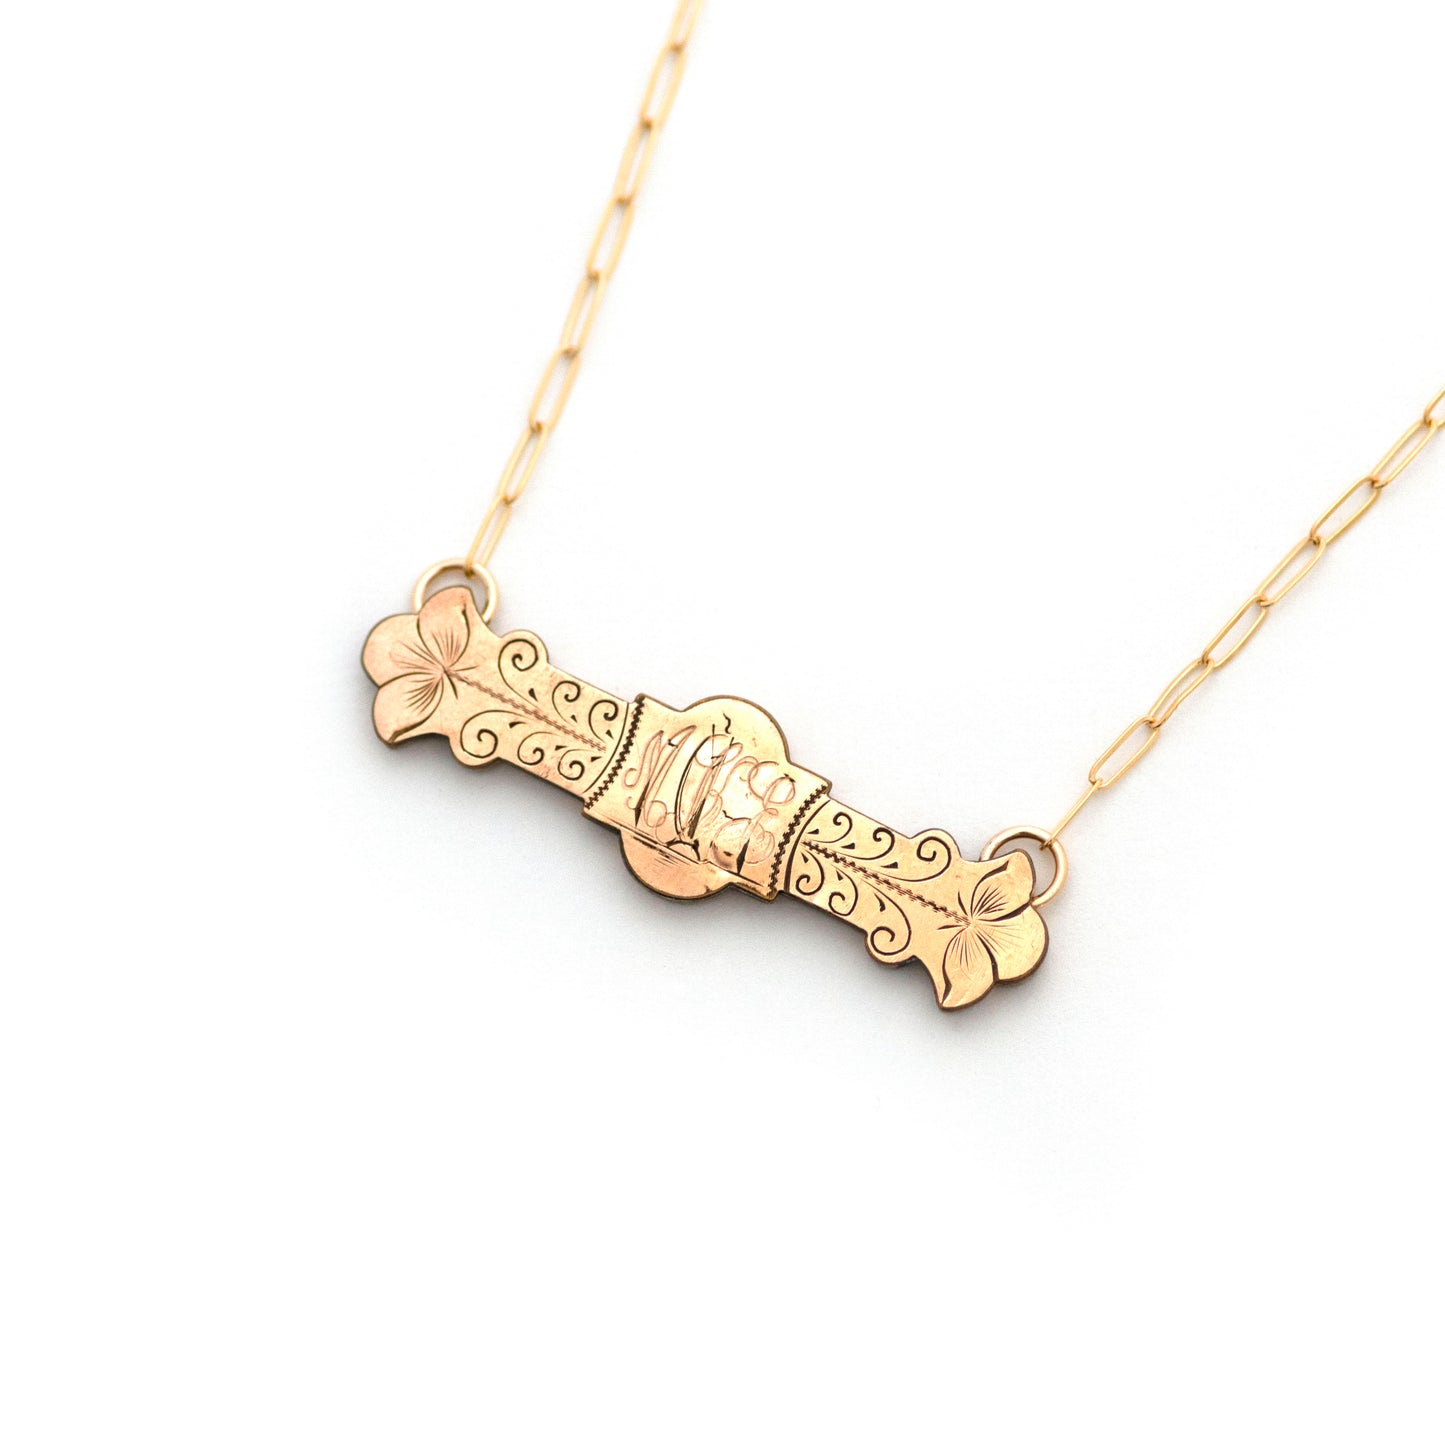 This antique conversion necklace is made up of:  Gold filled Victorian bar pin pendant from the late 1800s with hand engraved  details. Initials of MKE or MEK appear to be engraved over a landscape scene with a ship sailing over the open water and into the sunset.